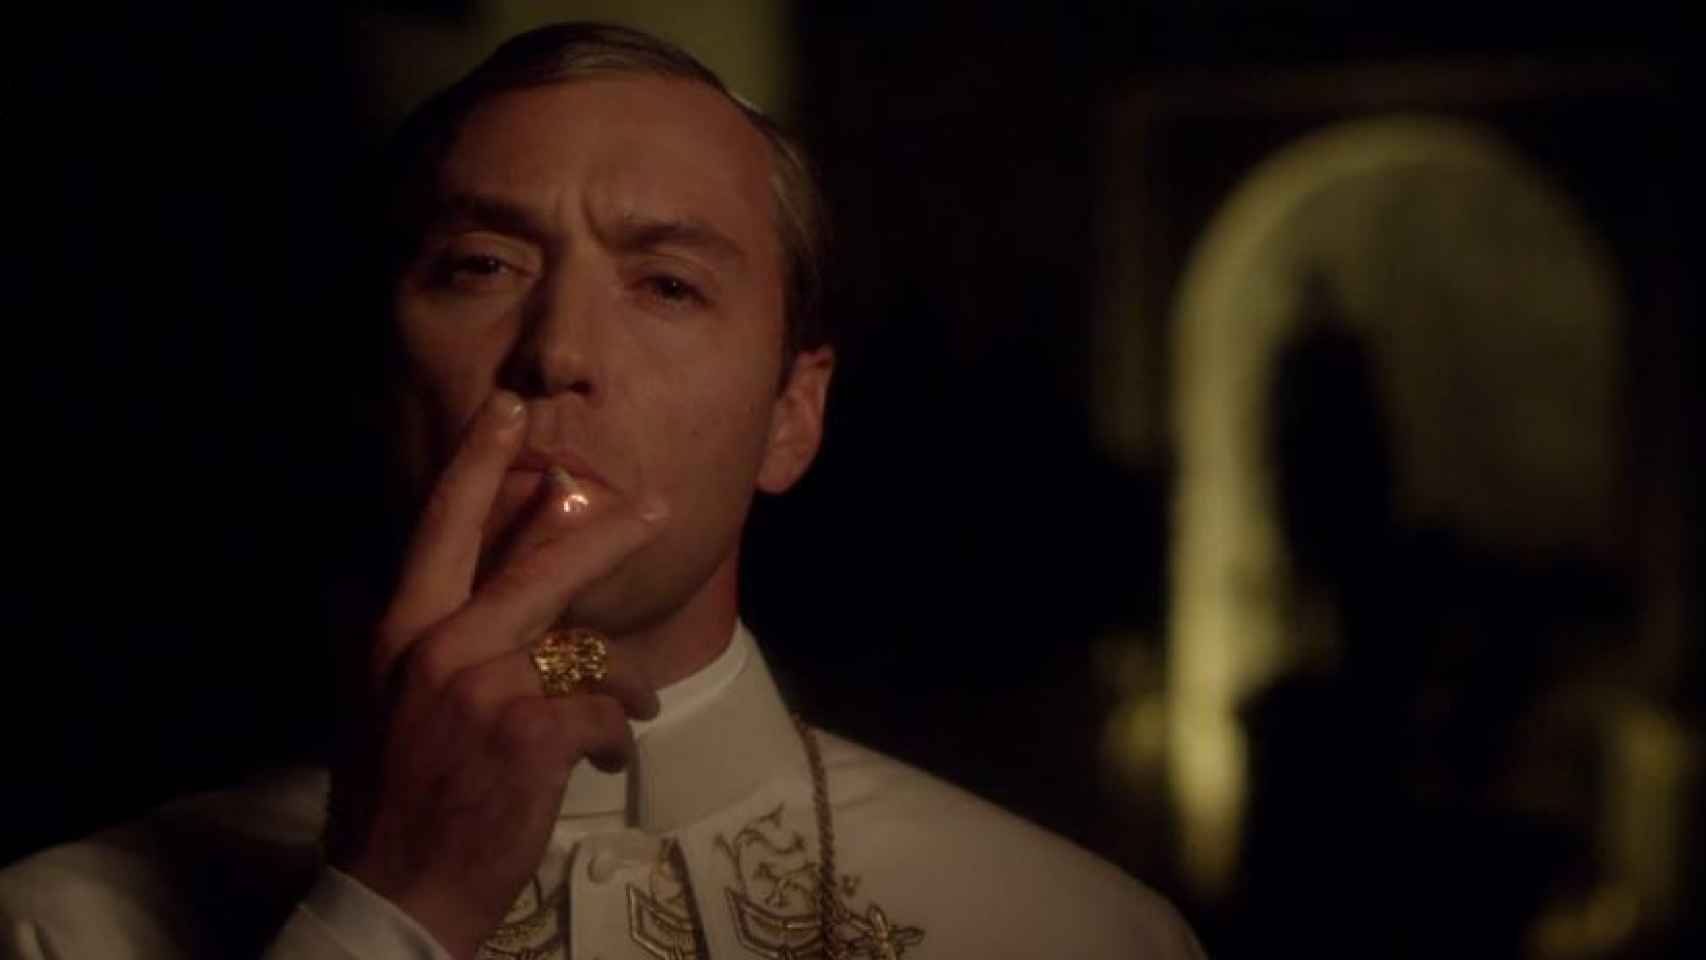 'The young pope'.